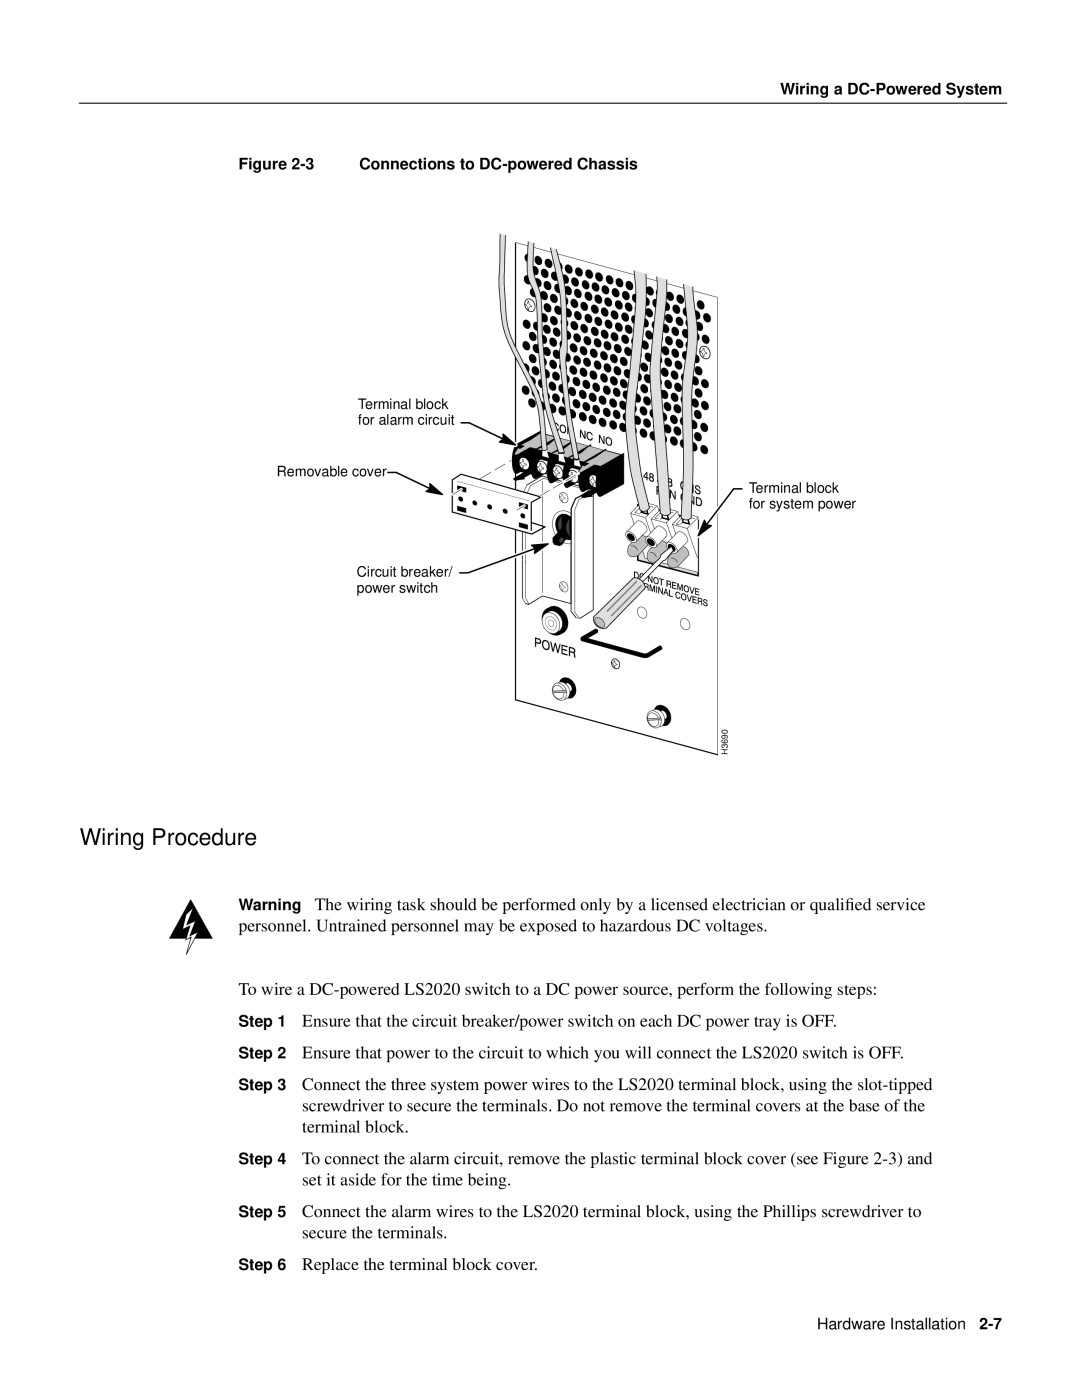 Cisco Systems 2020 manual Wiring Procedure 